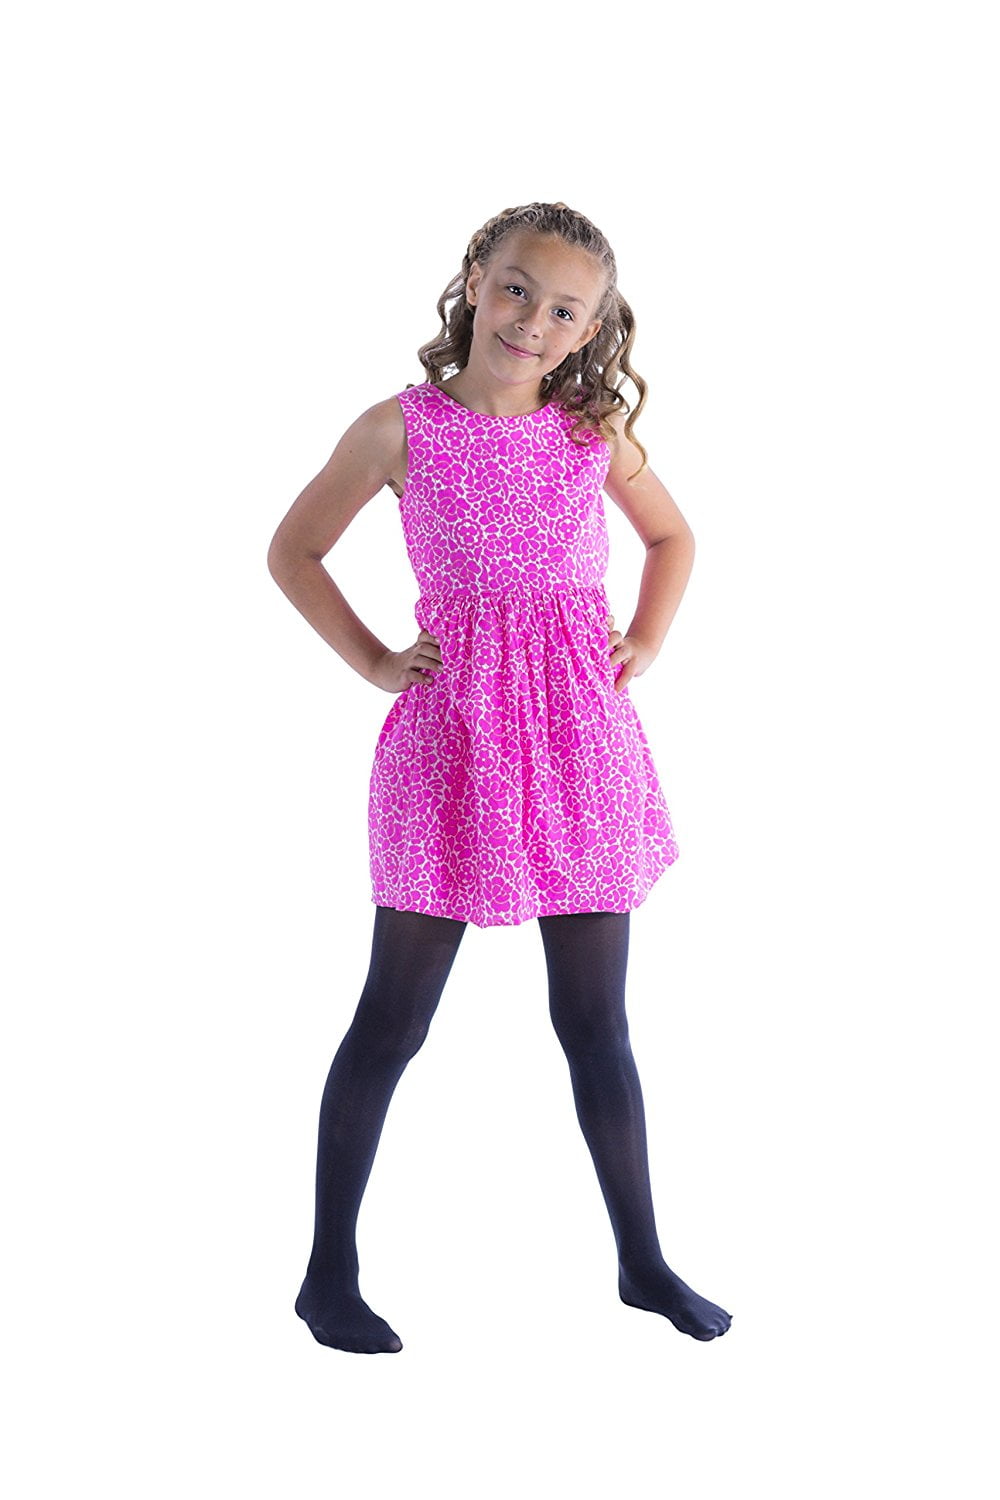 Silky Performance Childrens Opaque Dance Tights